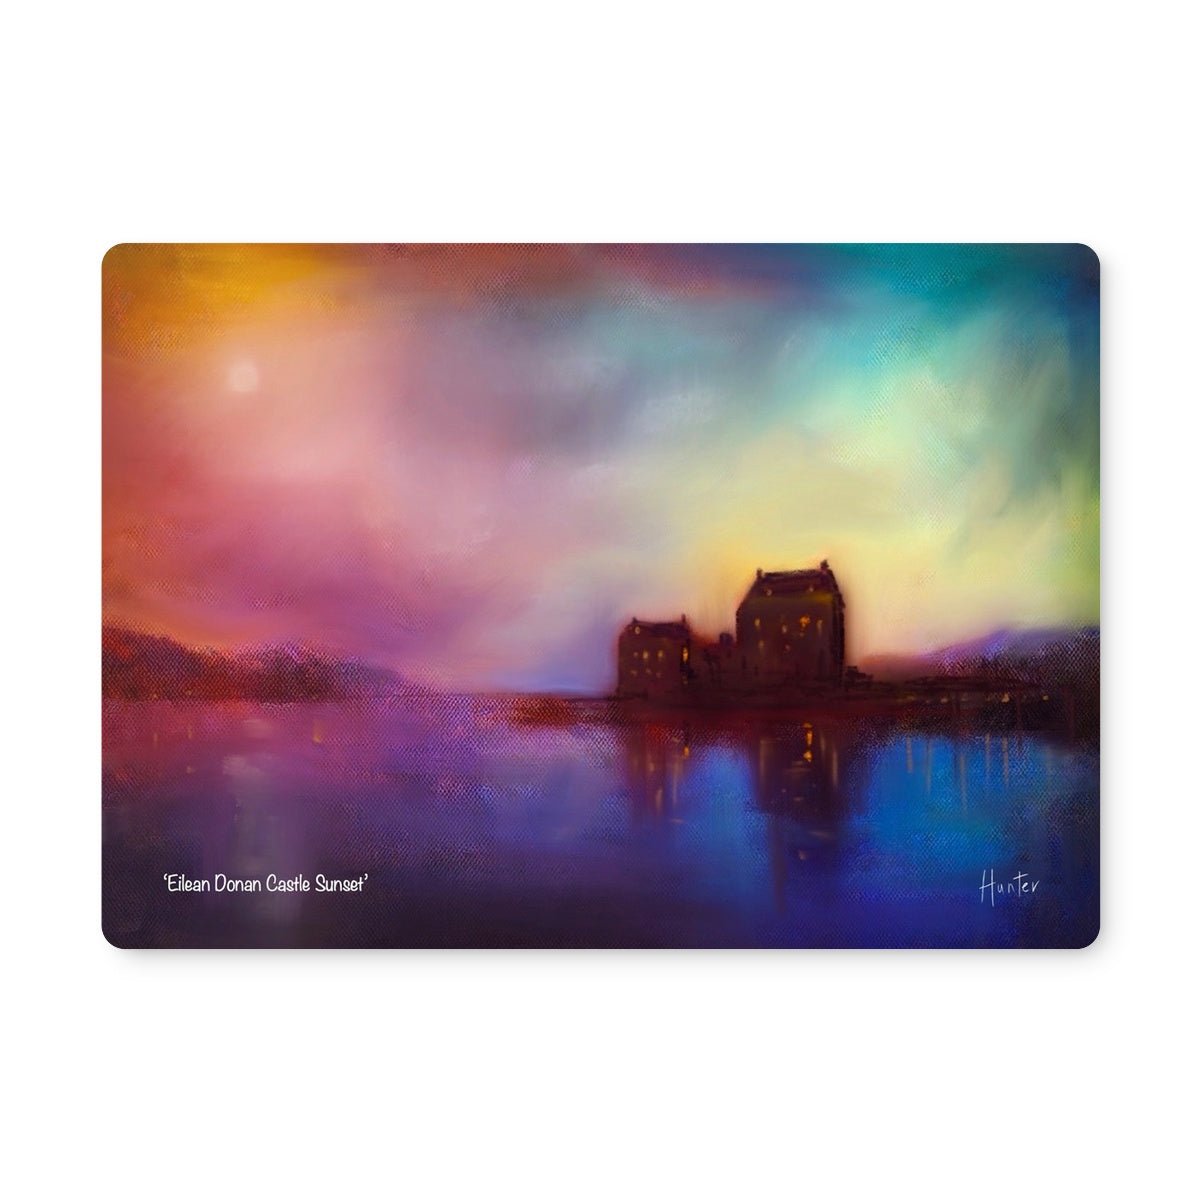 Eilean Donan Castle Sunset Art Gifts Placemat-Placemats-Historic & Iconic Scotland Art Gallery-Single Placemat-Paintings, Prints, Homeware, Art Gifts From Scotland By Scottish Artist Kevin Hunter